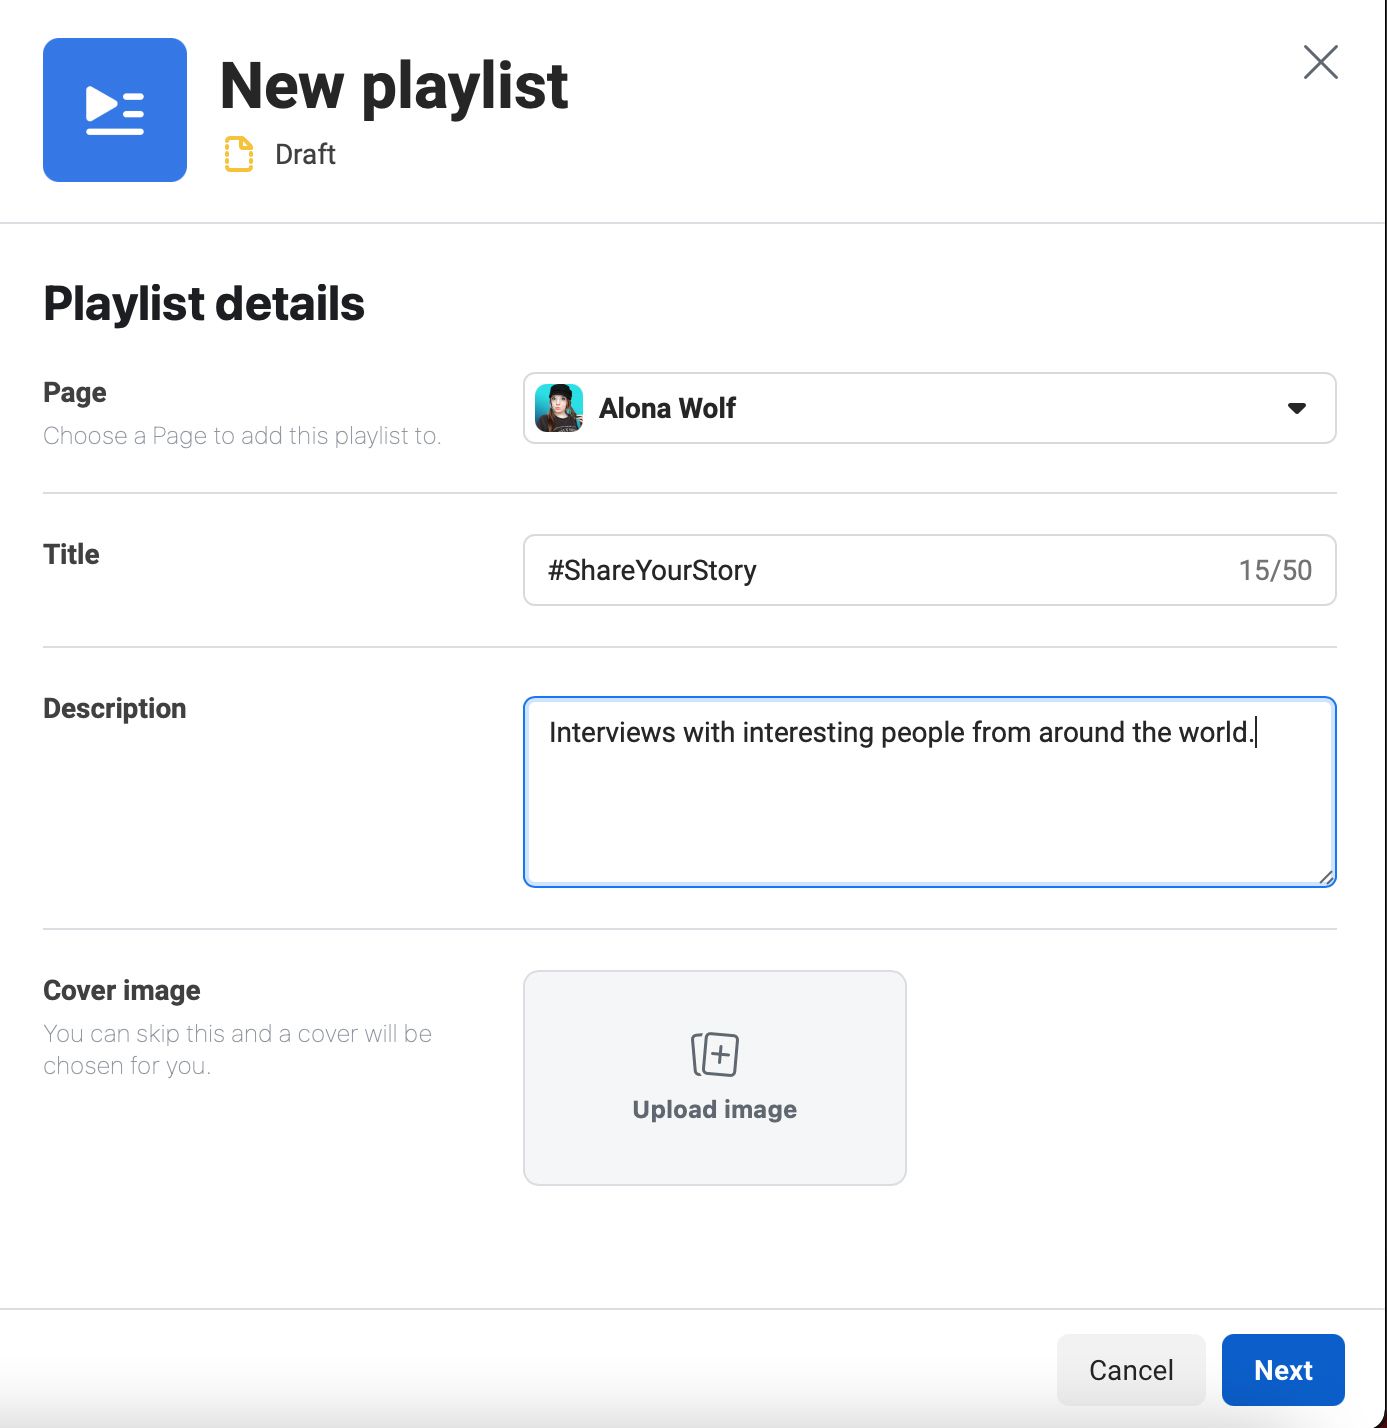 Select the page, add a title, description and cover image for Facebook playlist creation